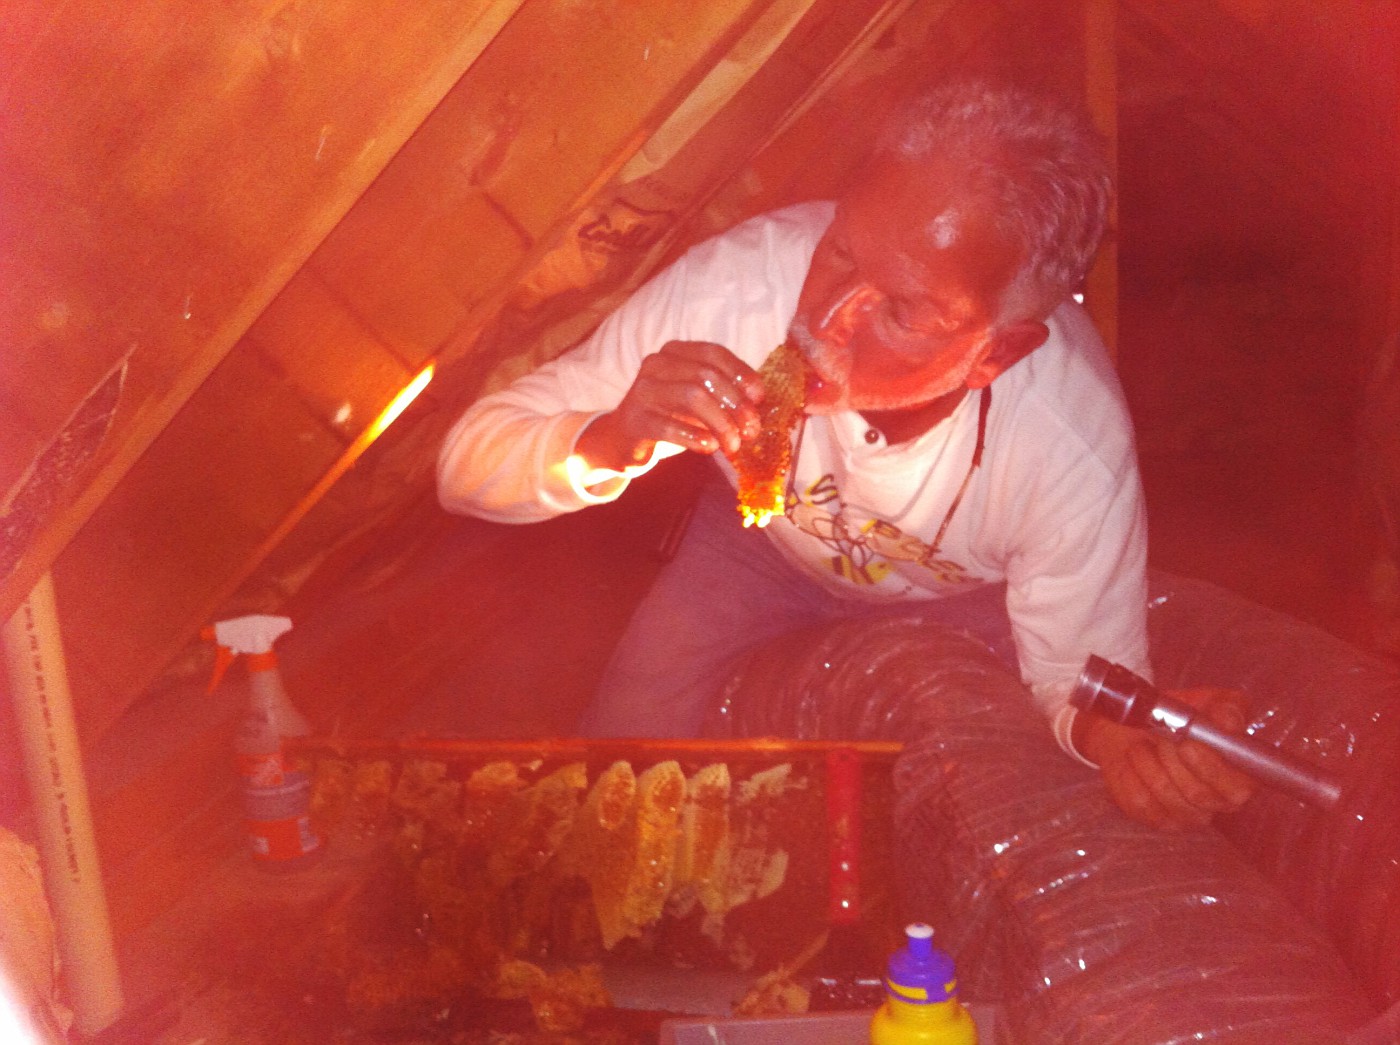 Honey Bee Extraction in very tight quarters in an attic knee wall in Cape May, NJ.  Yes, I am sampling the Honey with bees on the comb.  The Philadelphia Inquirer was there.  Got a story and awesome pix & video.  In Sunday's paper 4-29-2012. Gary